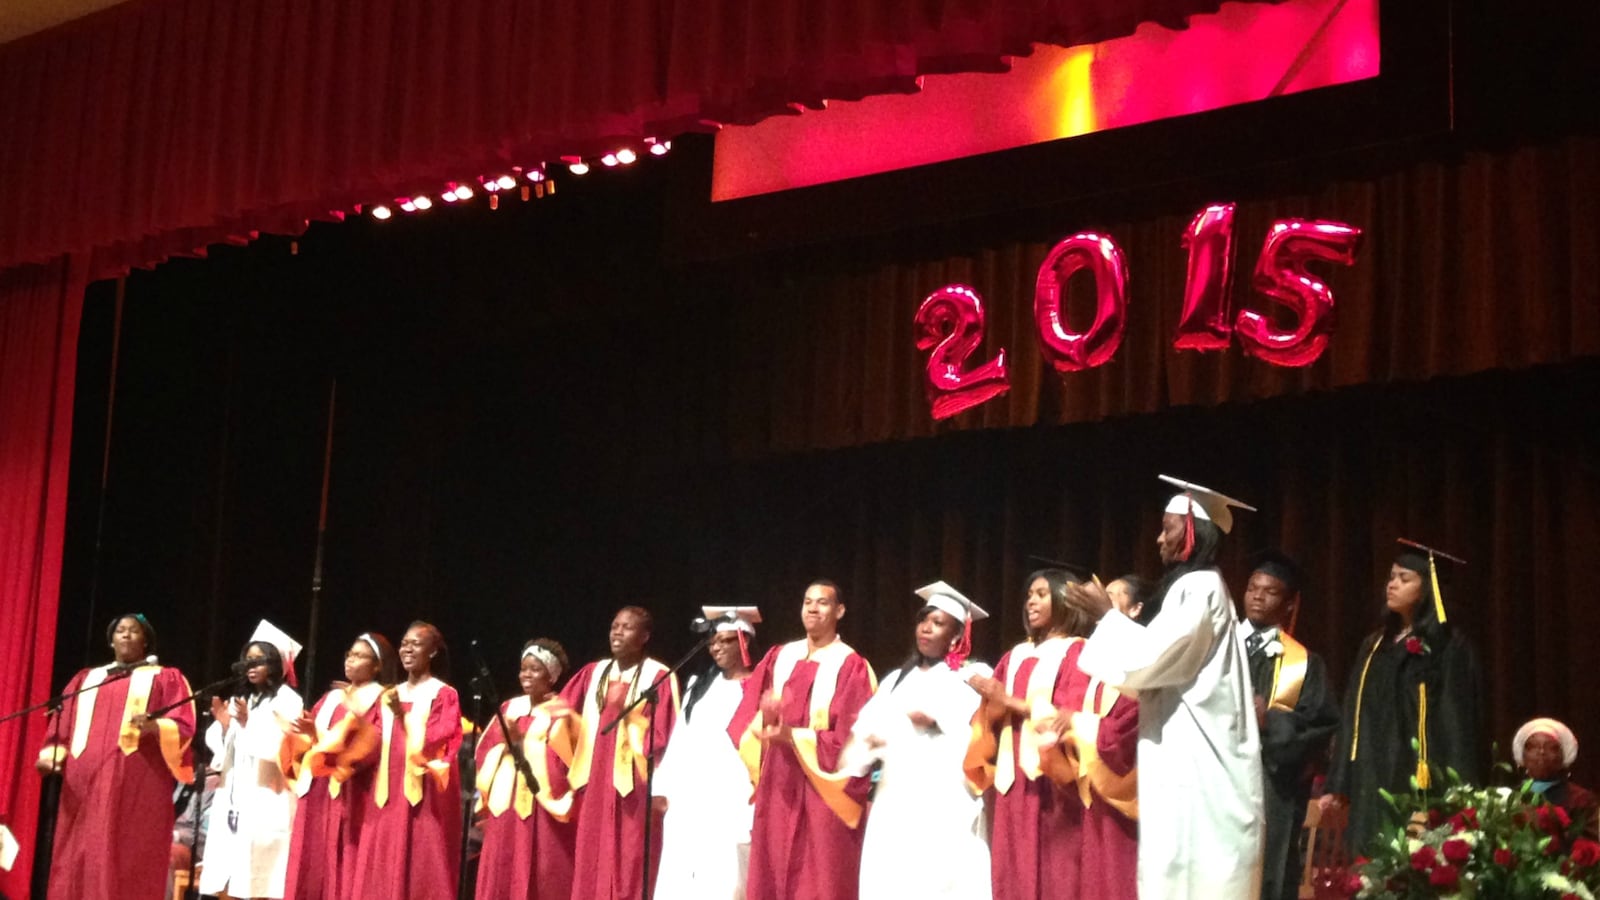 A joint Medgar Evers-Boys and Girls choir performed at a graduation.